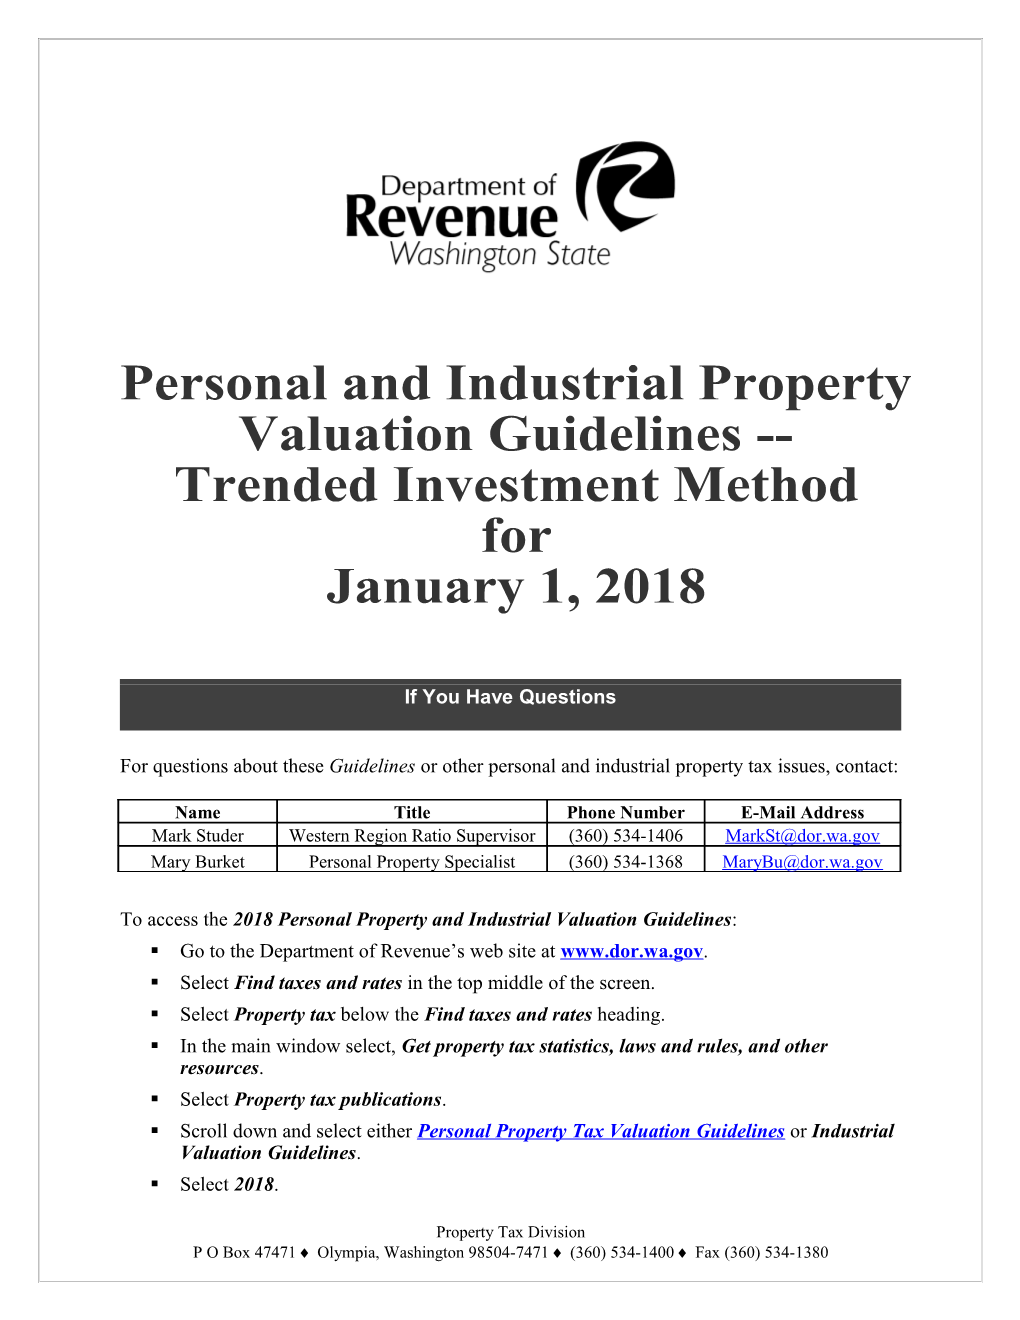 Personal and Industrial Property Valuation Guidelines - Trended Investment Method REV 64 0104